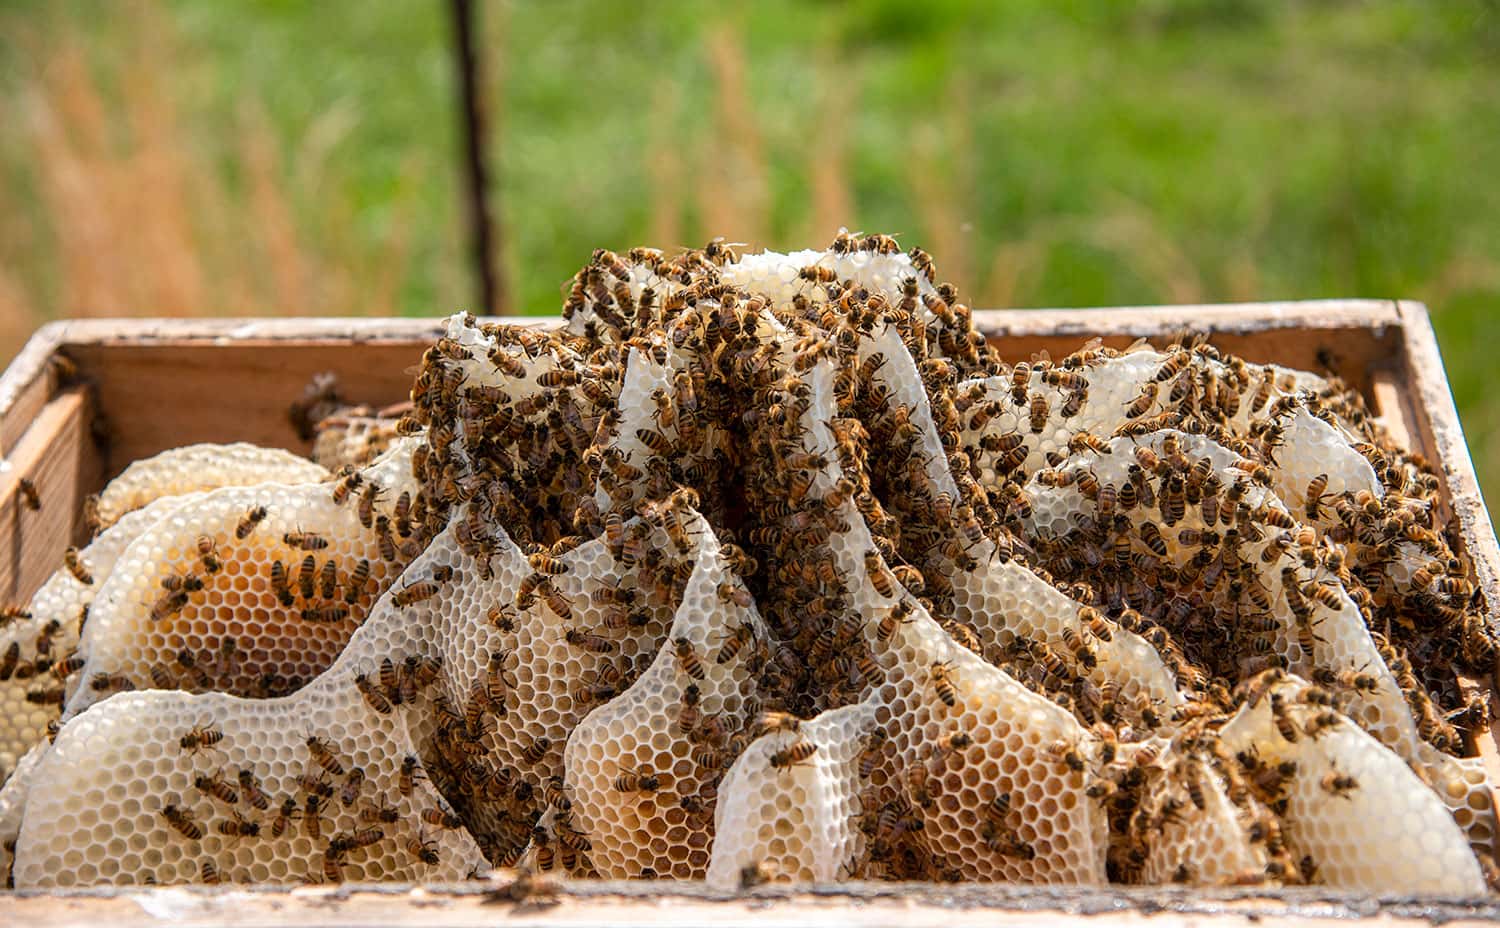 A closeup of the hive shows the Berry Bees in action